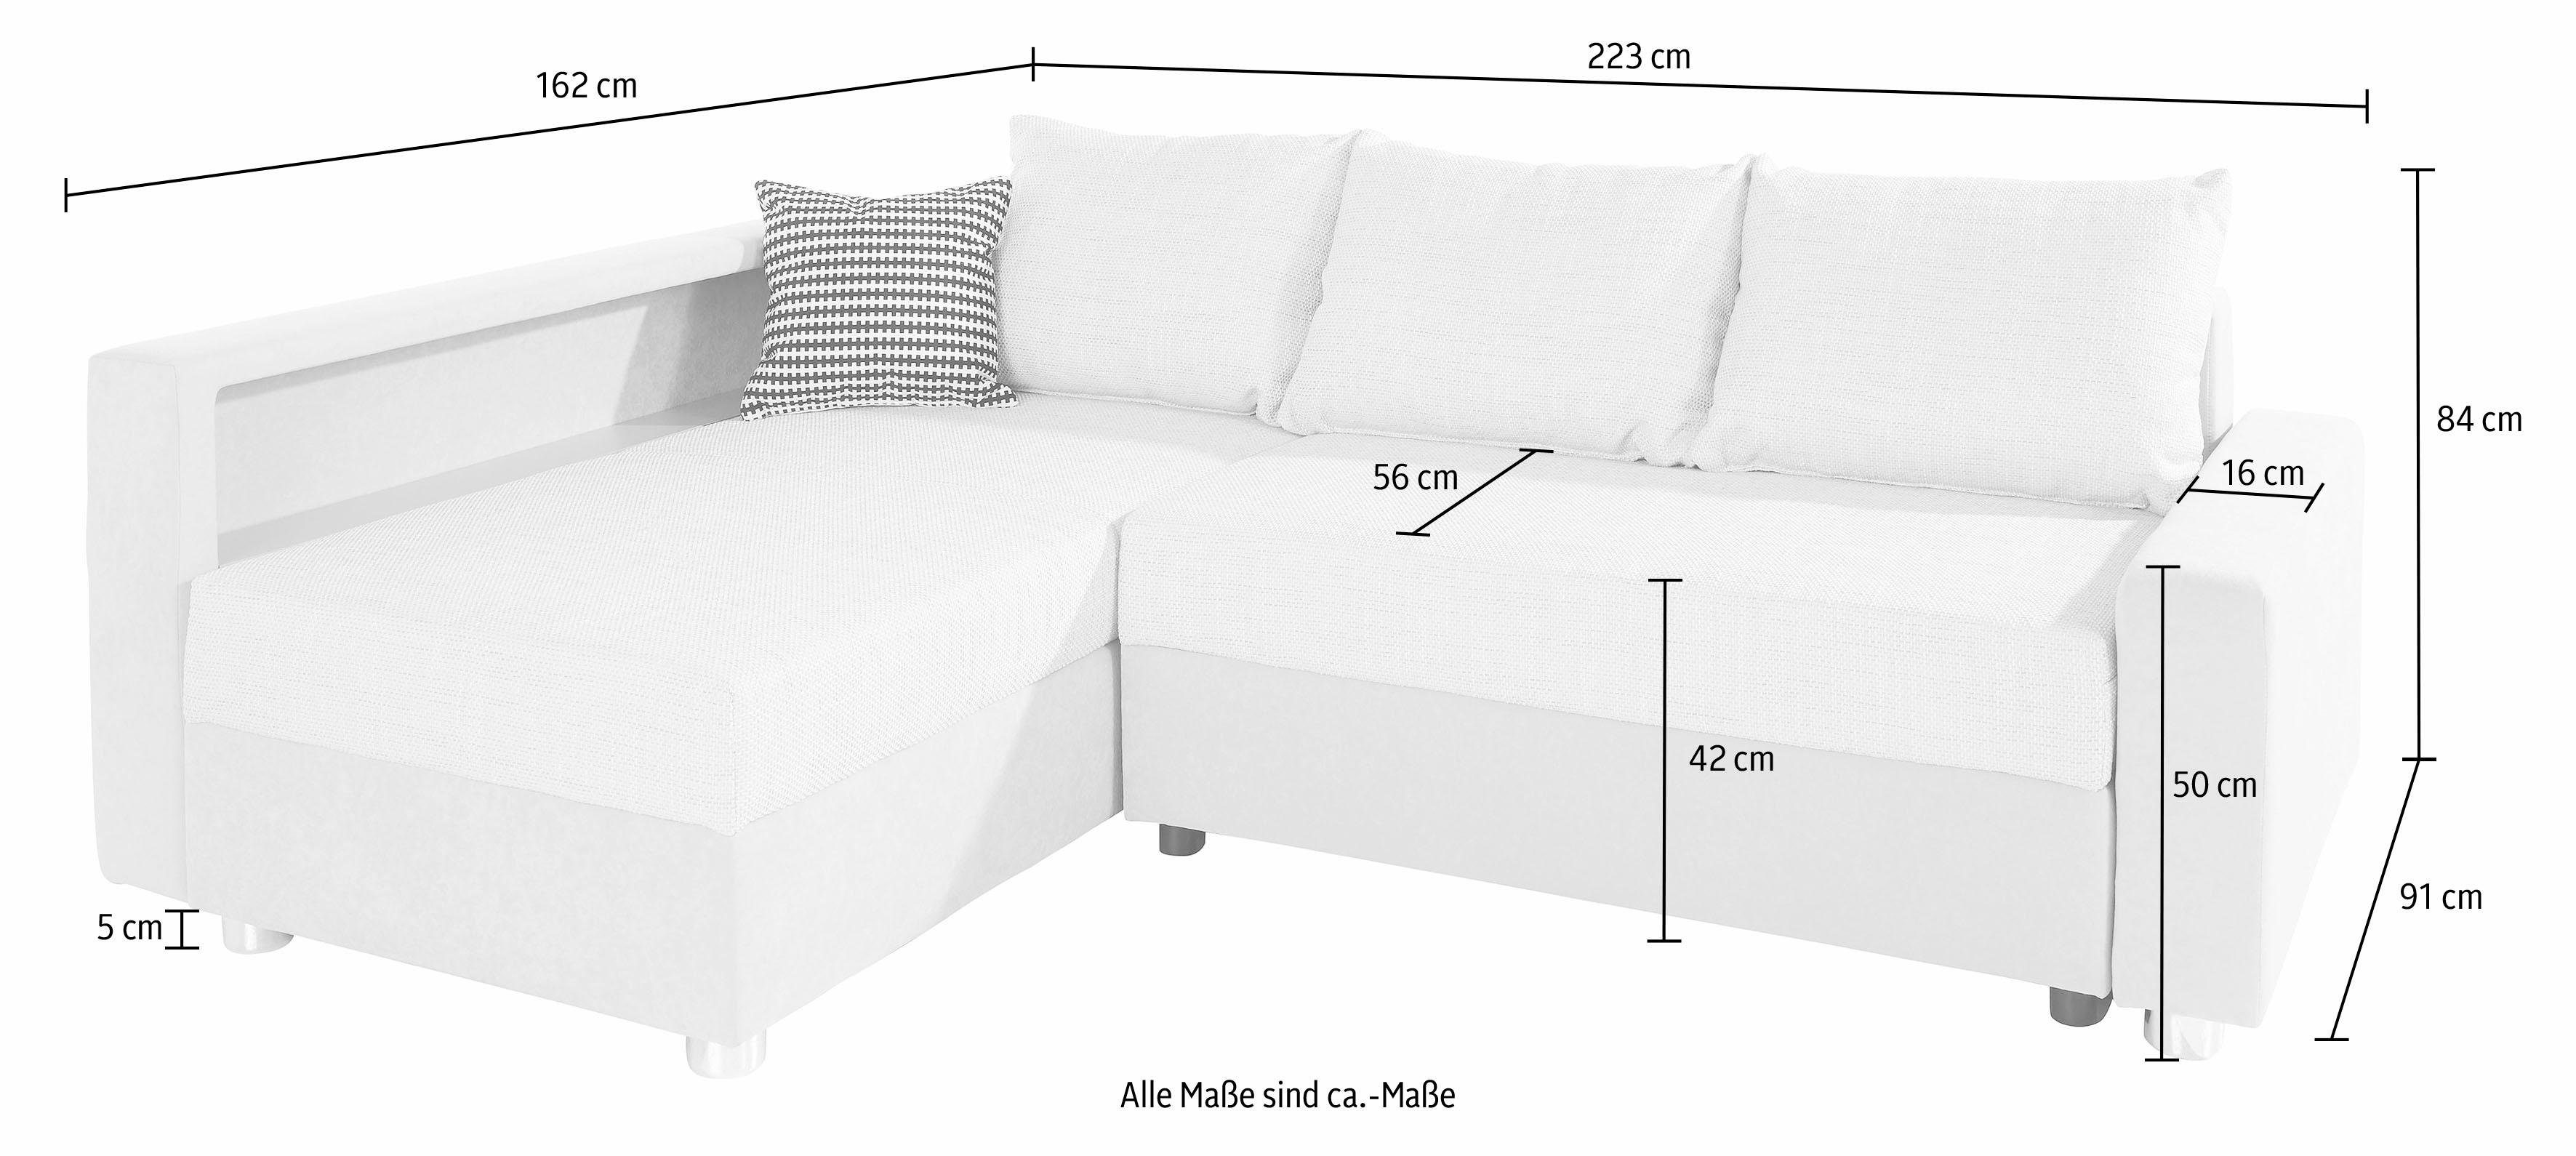 Bettfunktion, AB Ecksofa inklusive COLLECTION RGB-LED-Beleuchtung wahlweise Relax, mit Federkern,